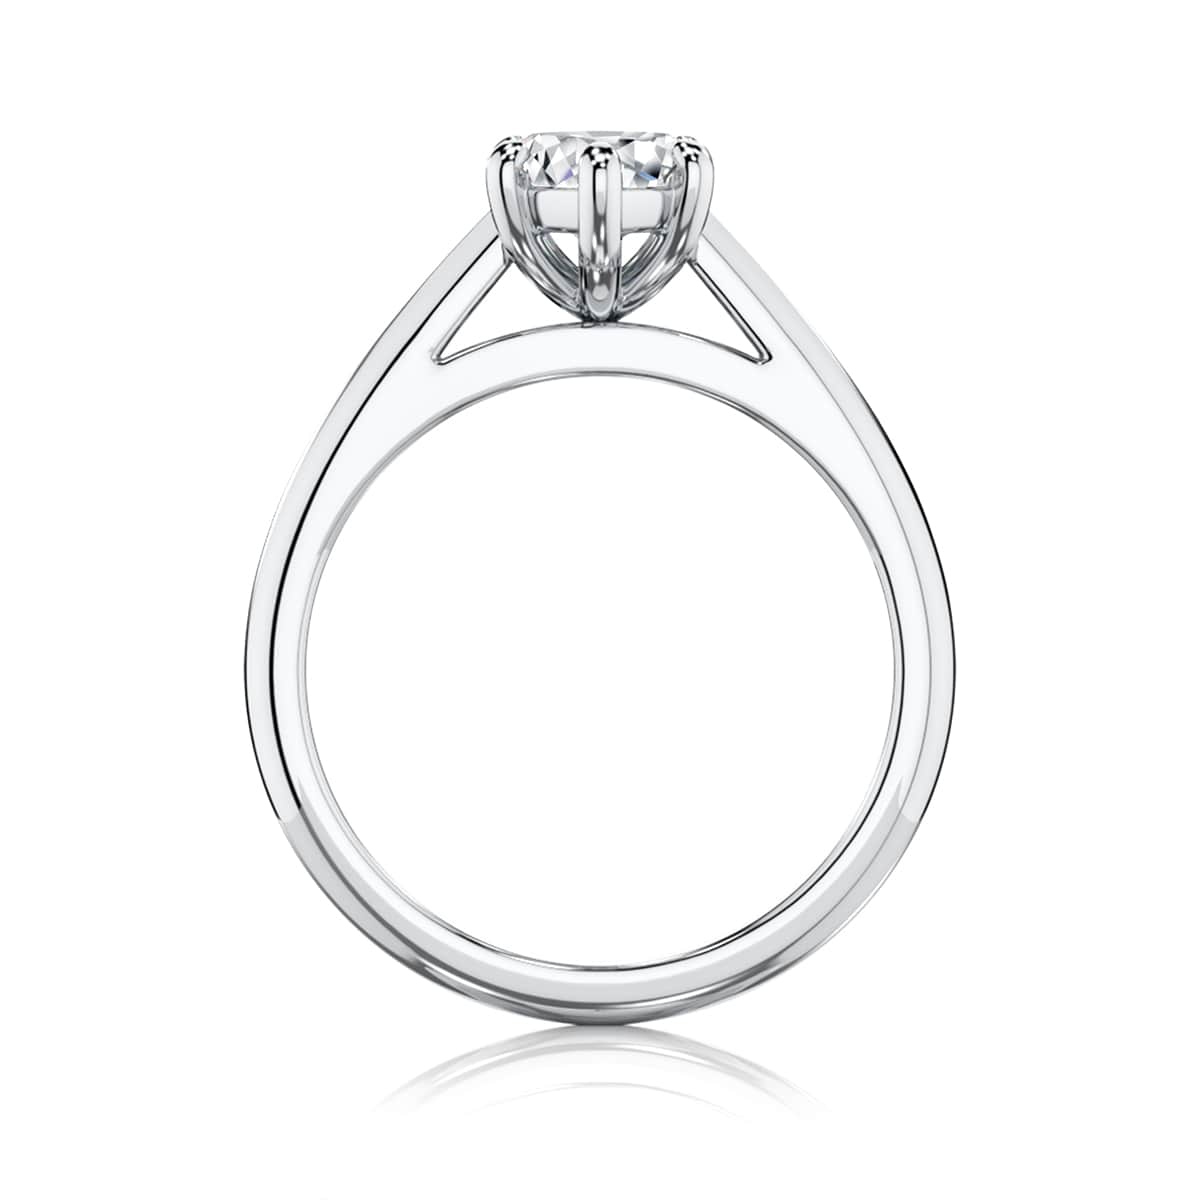 Marchesa Marquise Diamond Solitaire Engagement Ring in White Gold